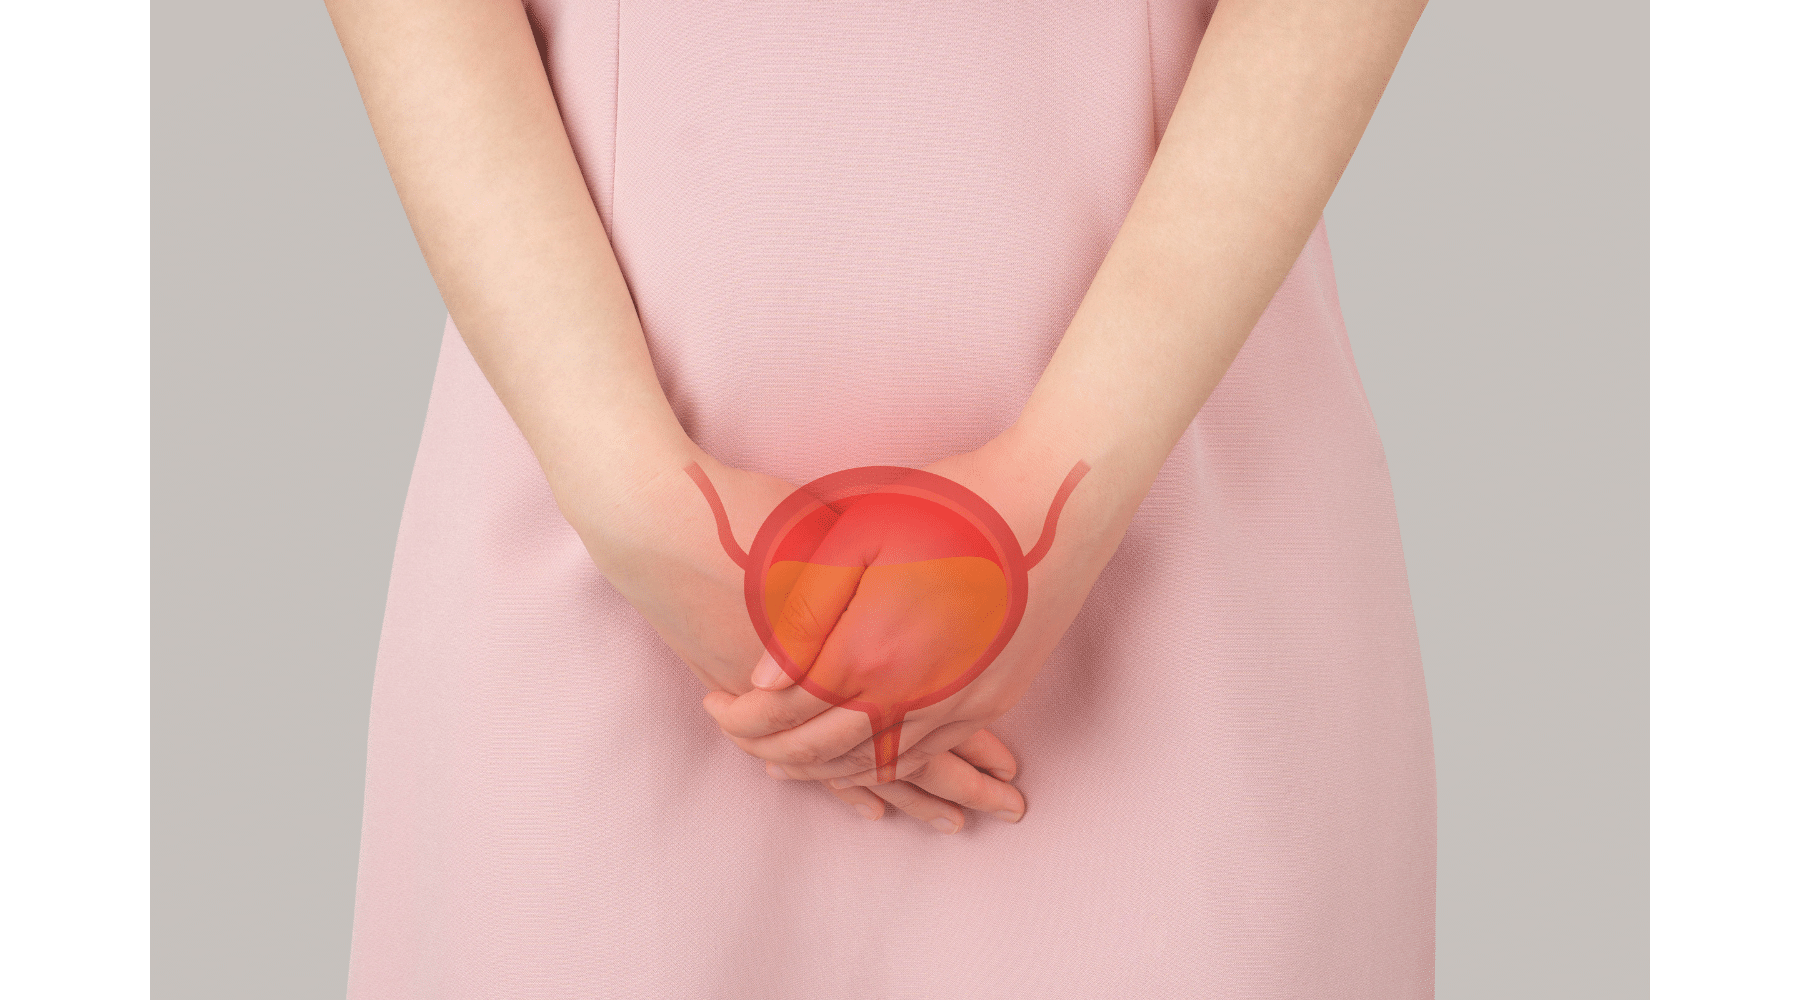 Peeing Problems? Why Bladder Discomfort Could Be a Sign of Interstitial Cystitis